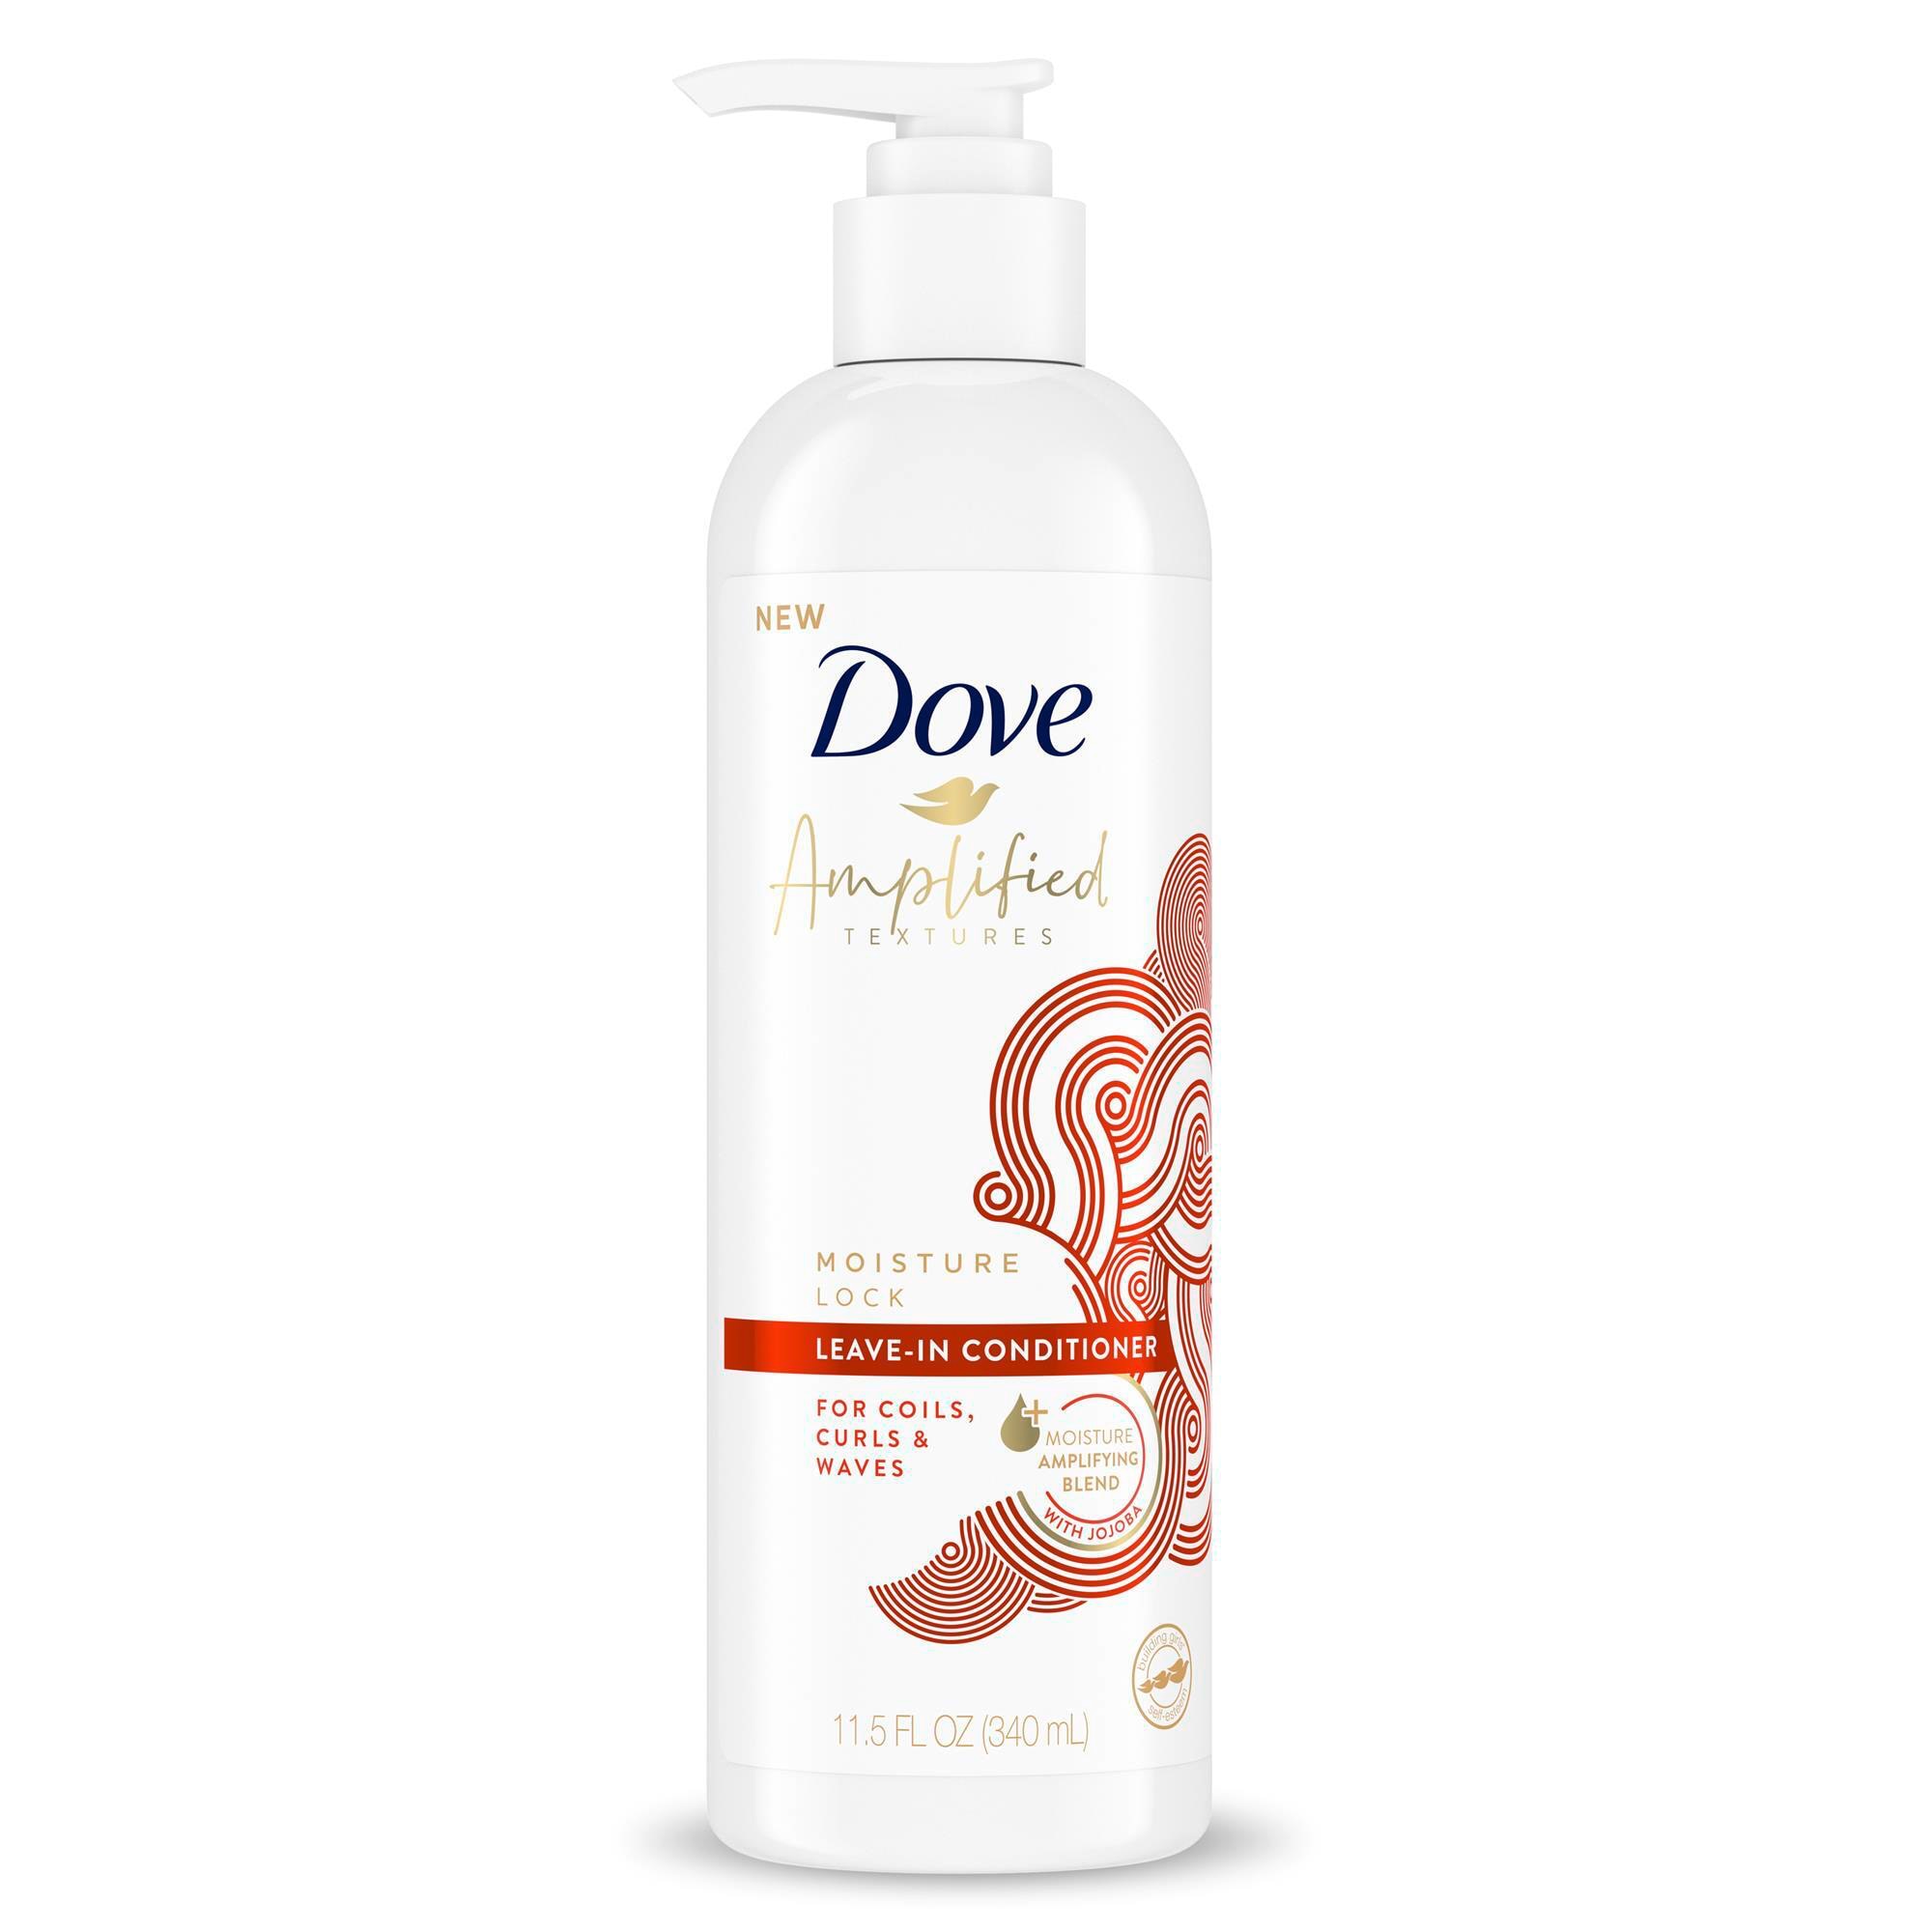 Amplified Textures Moisture Lock Leave-In Conditioner | Dove